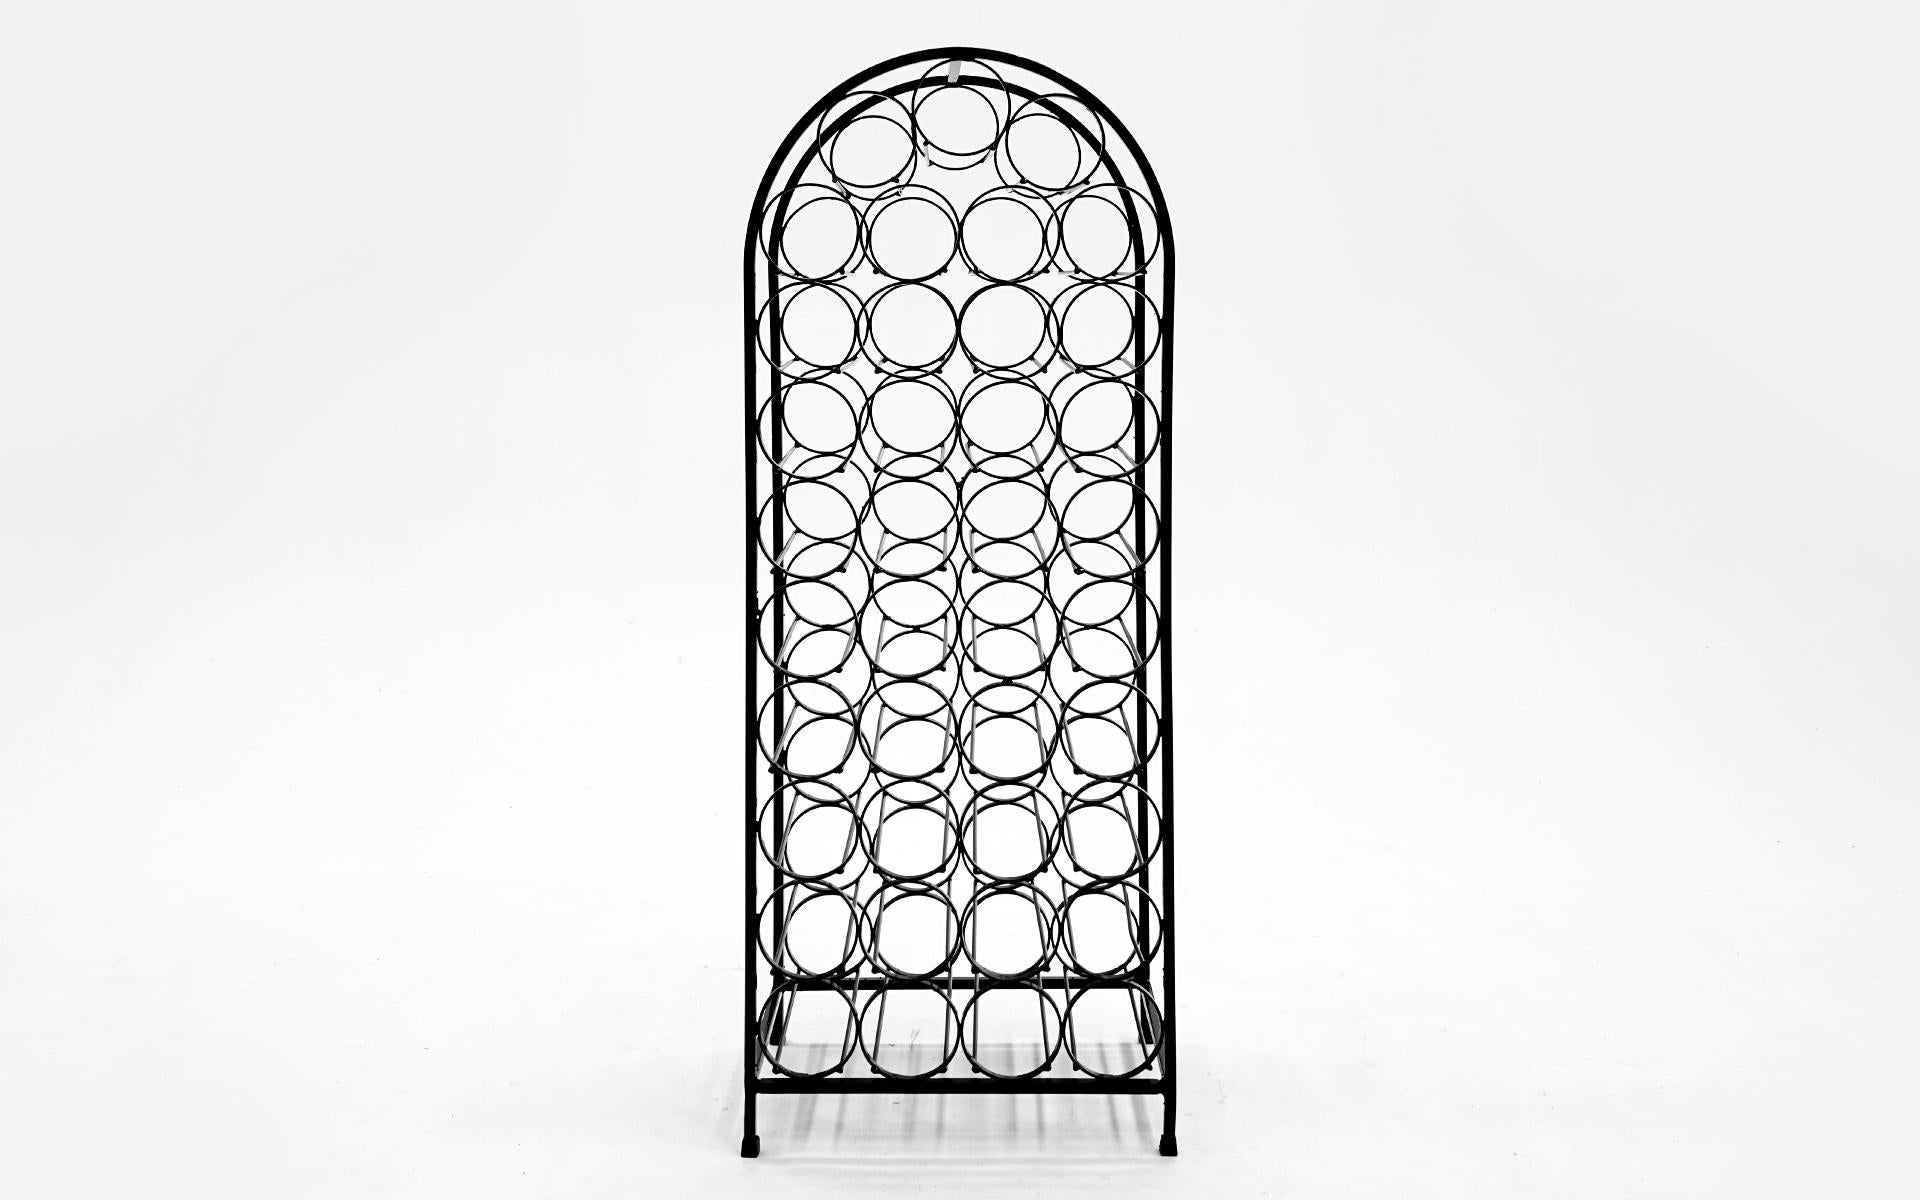 Freestanding wrought iron wine rack / holder designed by Arthur Umanoff, 1960s. Professionally restored and powder coated in a black satin finish. The only evidence of any wear are to the original rubber feet.